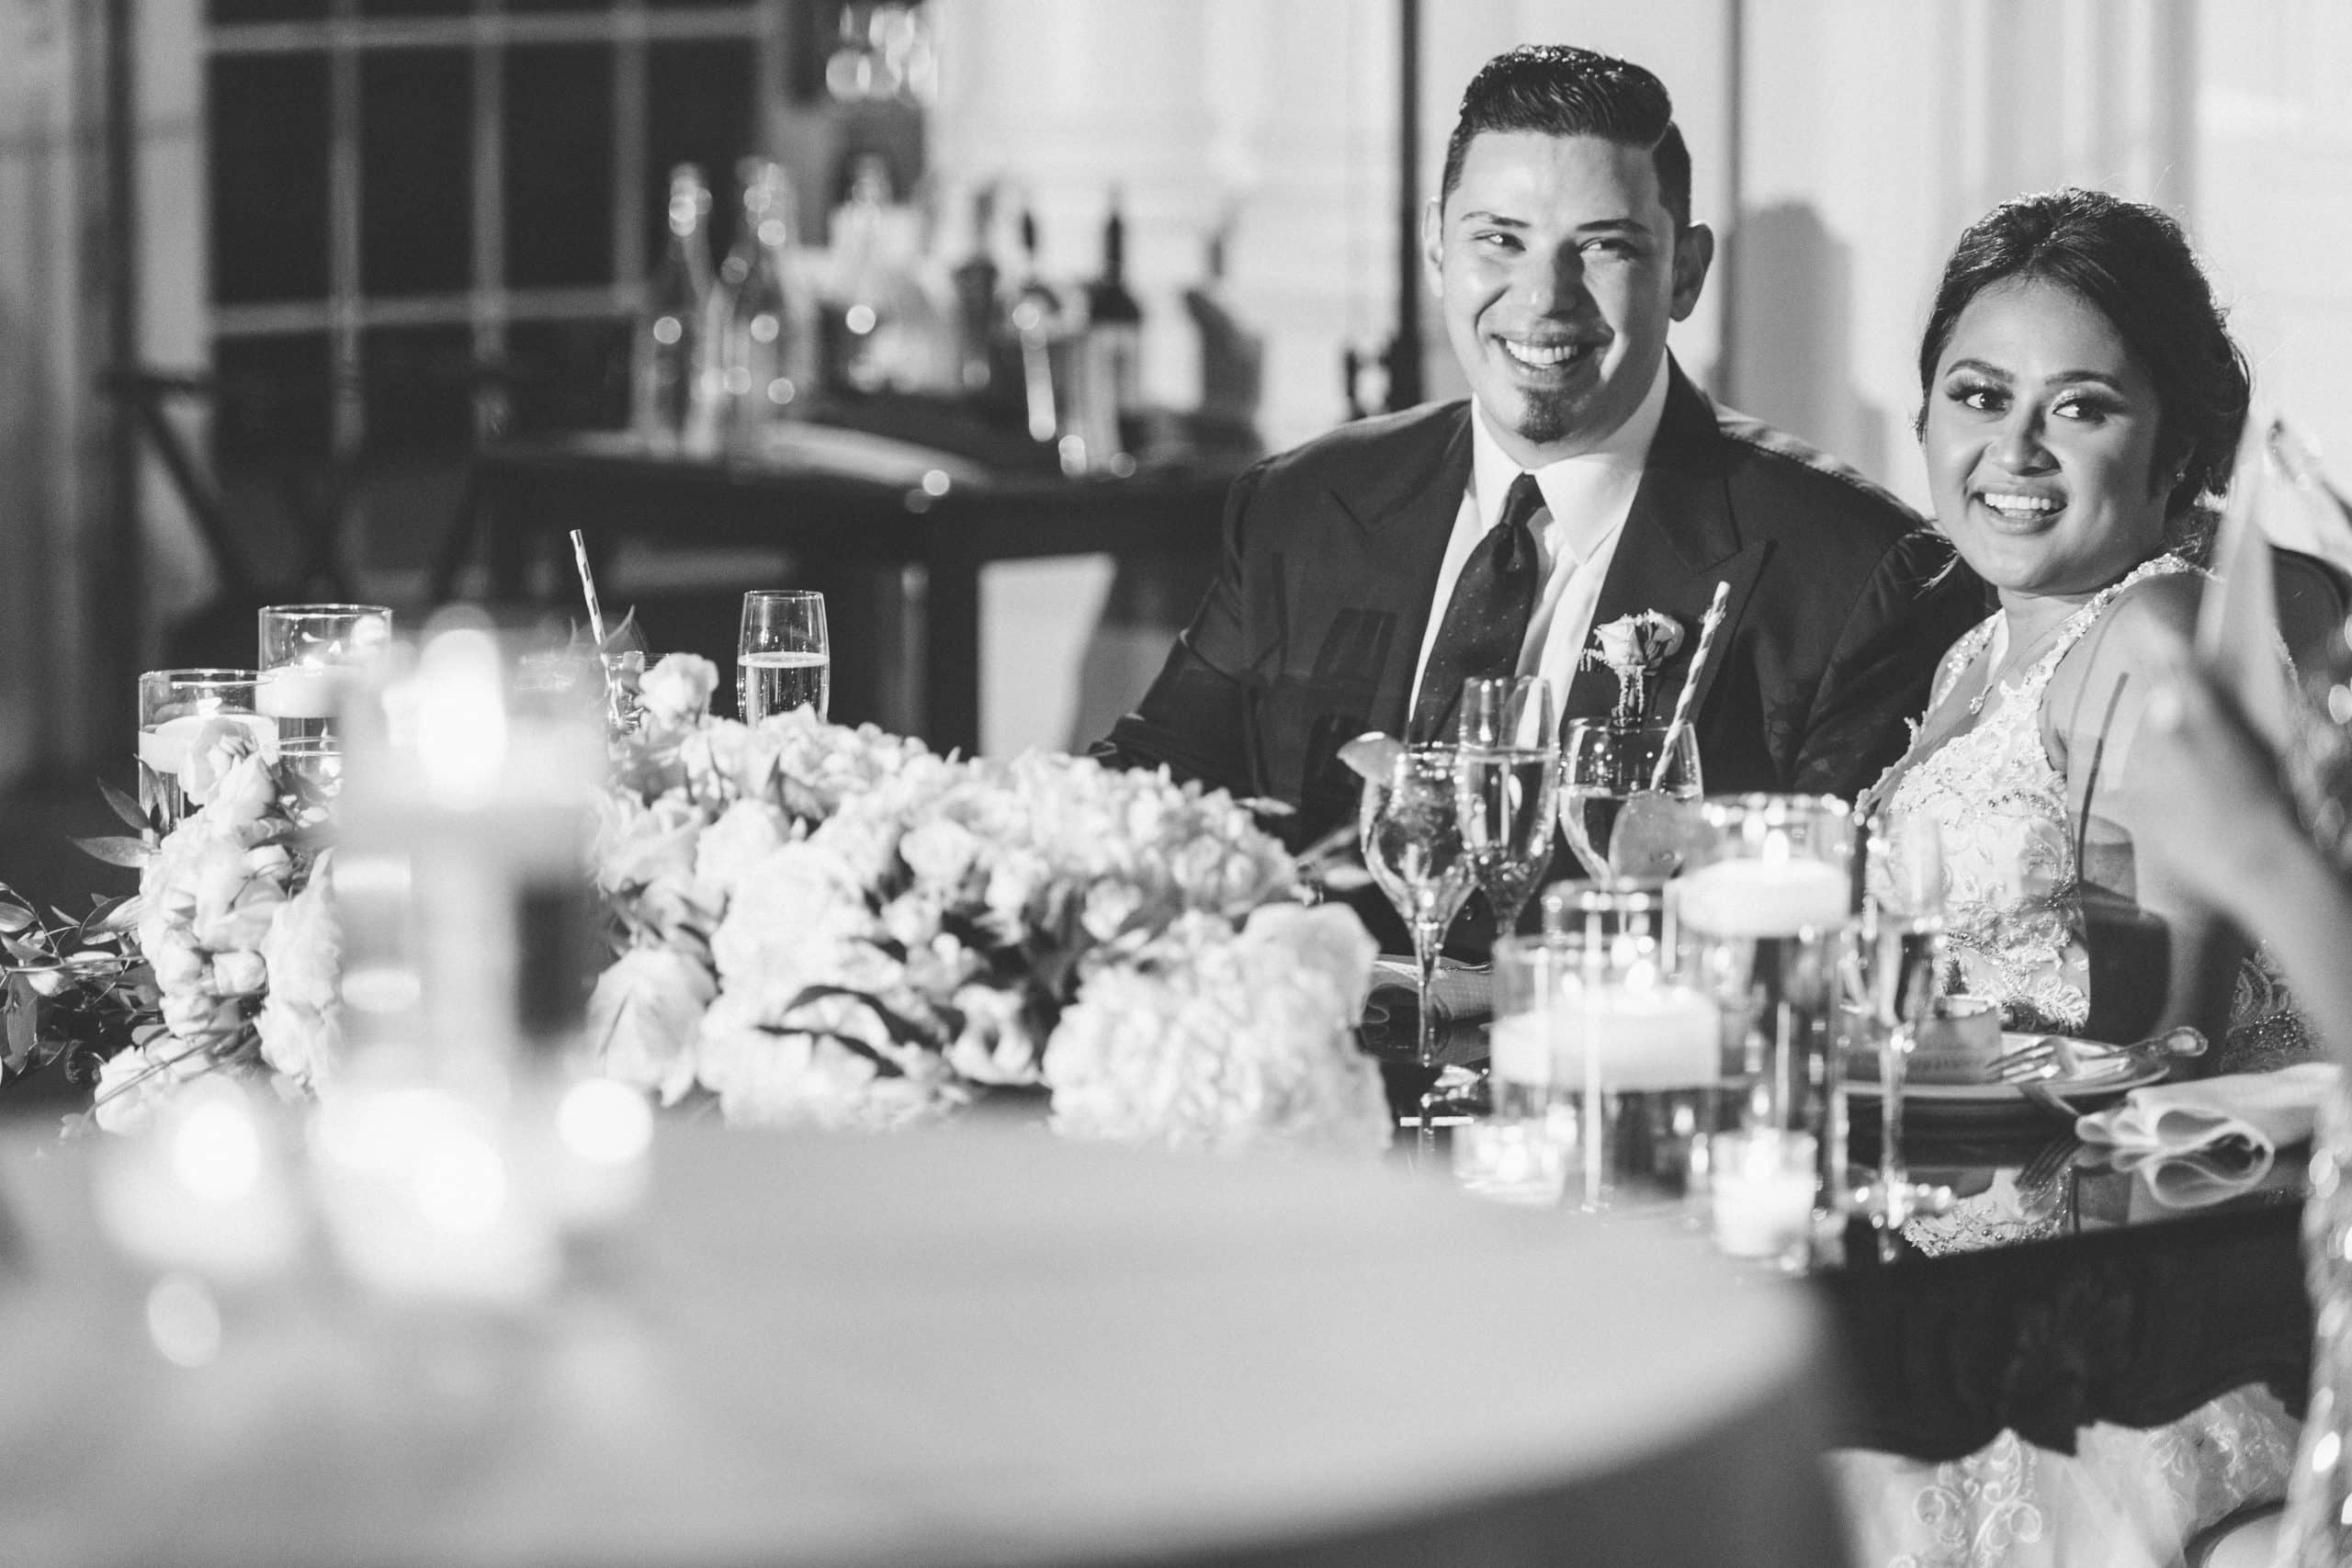 Park Chateau wedding in North Jersey, captured by fun, candid, documentary wedding photographer Ben Lau.